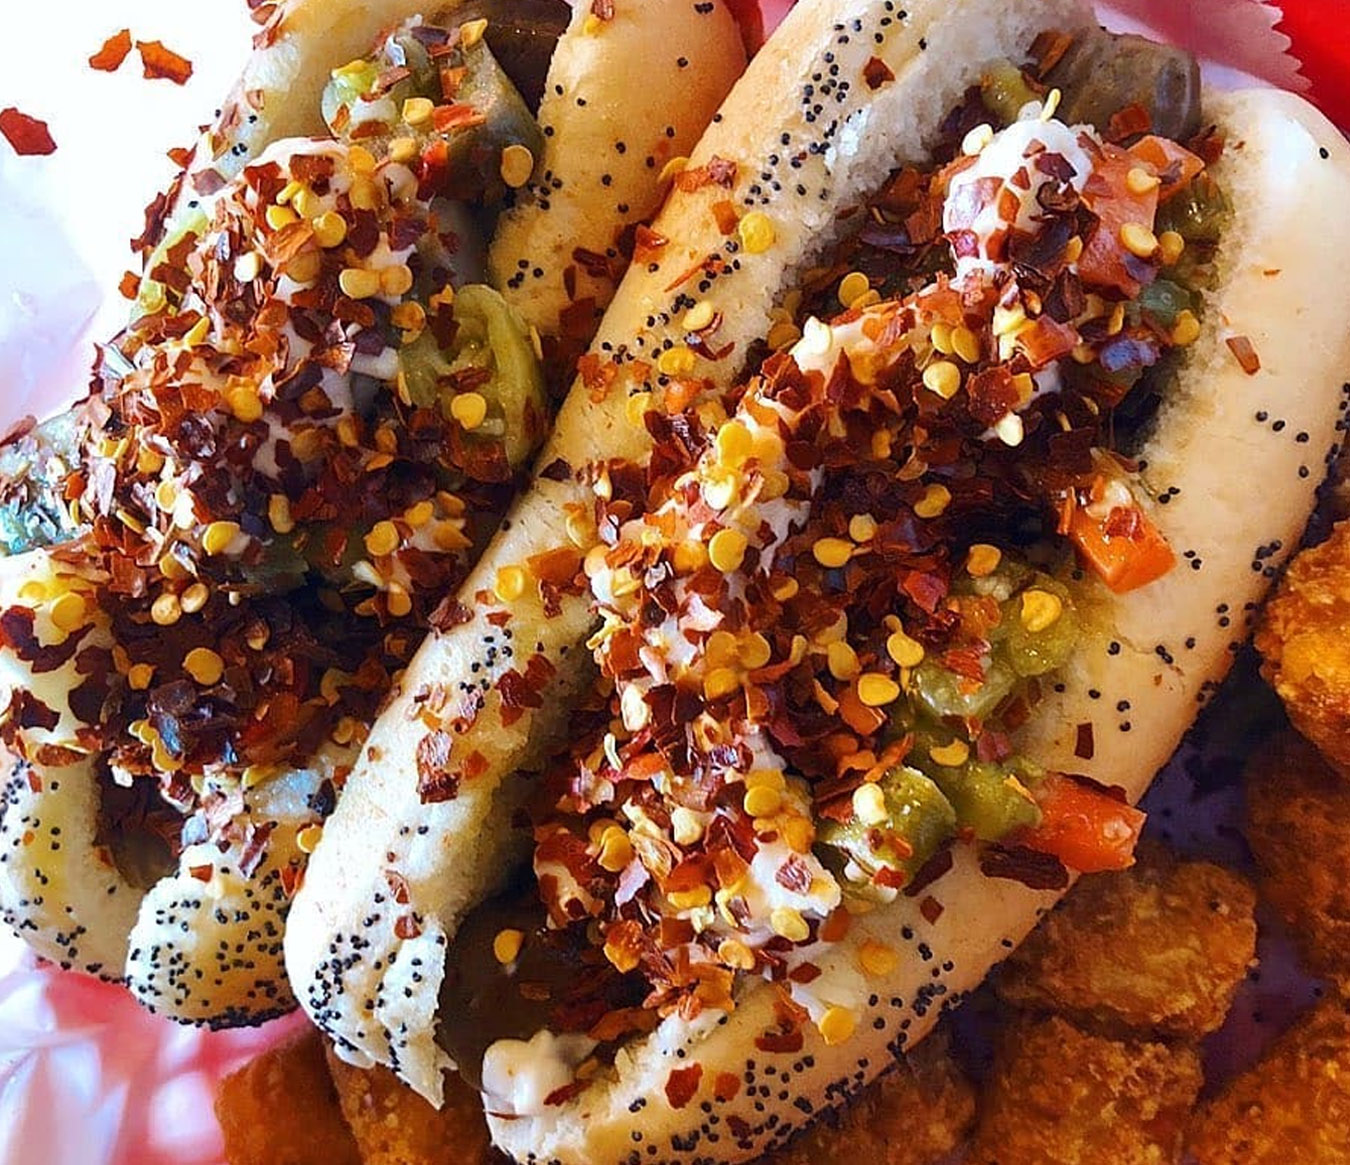 Where to Eat In Columbus - Dirty Frank's Hot Dog Palace